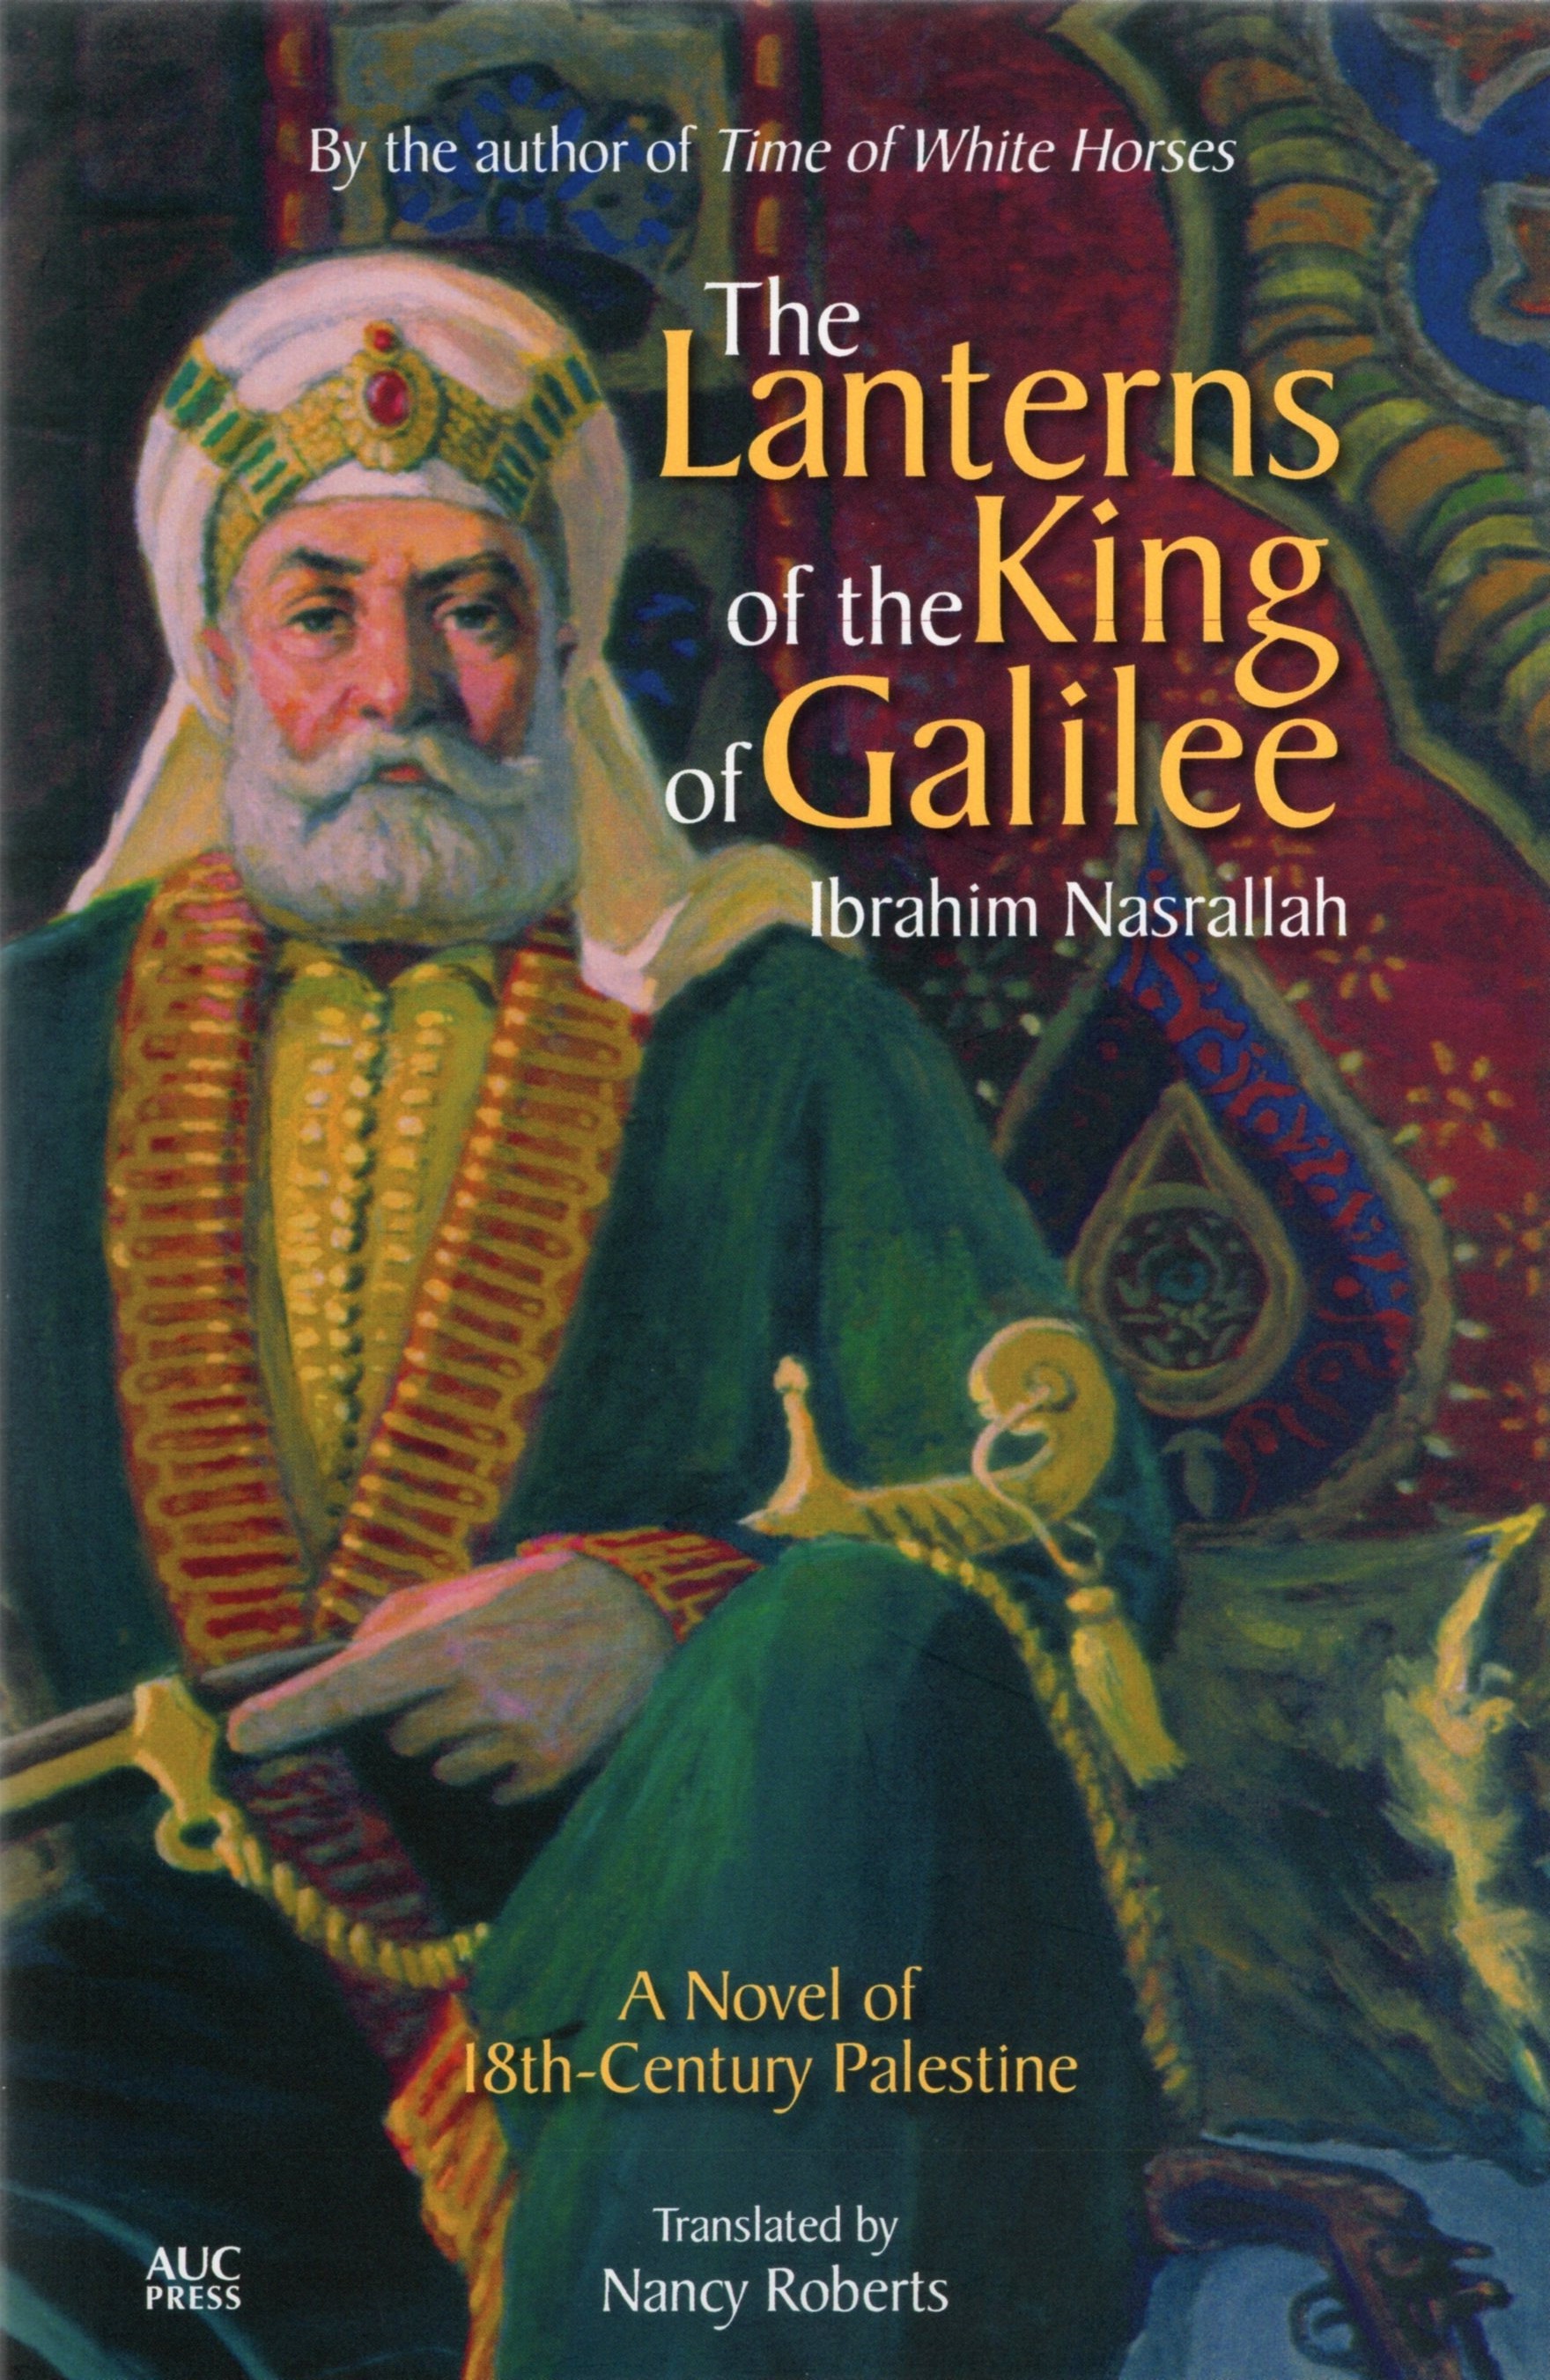 Lanterns of the King of Galilee_book cover